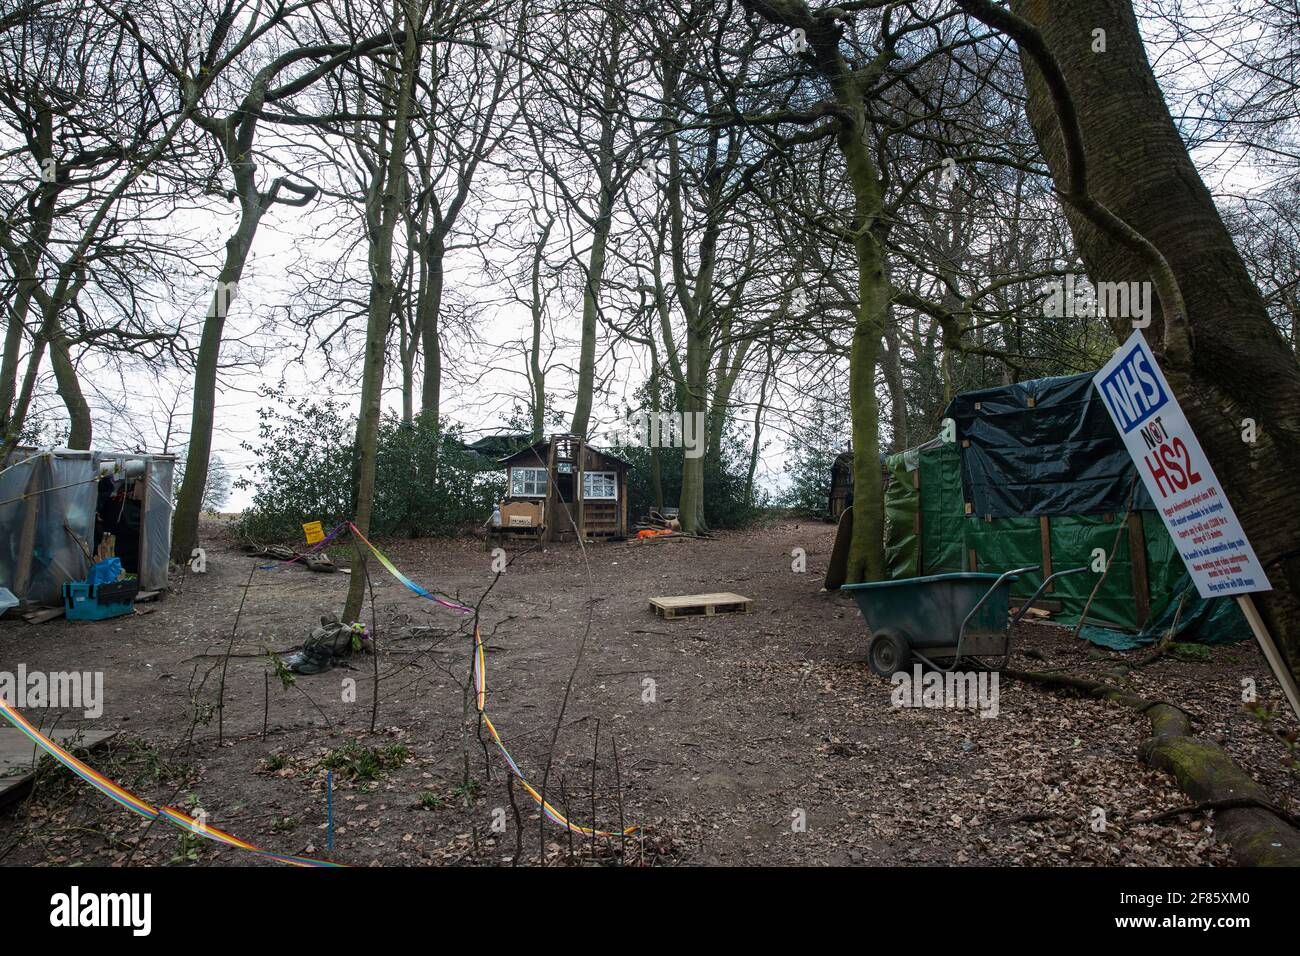 Wendover, UK. 9th April, 2021. A section of an environmental protection camp is pictured at Jones Hill Wood, ancient woodland said to have inspired Roald Dahl, during tree felling operations for the HS2 high-speed rail link. Tree felling work began this week, in spite of the presence of resting places and/or breeding sites for pipistrelle, barbastelle, noctule, brown long-eared and natterer's bats, following the issuing of a bat licence to HS2's contractors by Natural England on 30th March. Credit: Mark Kerrison/Alamy Live News Stock Photo